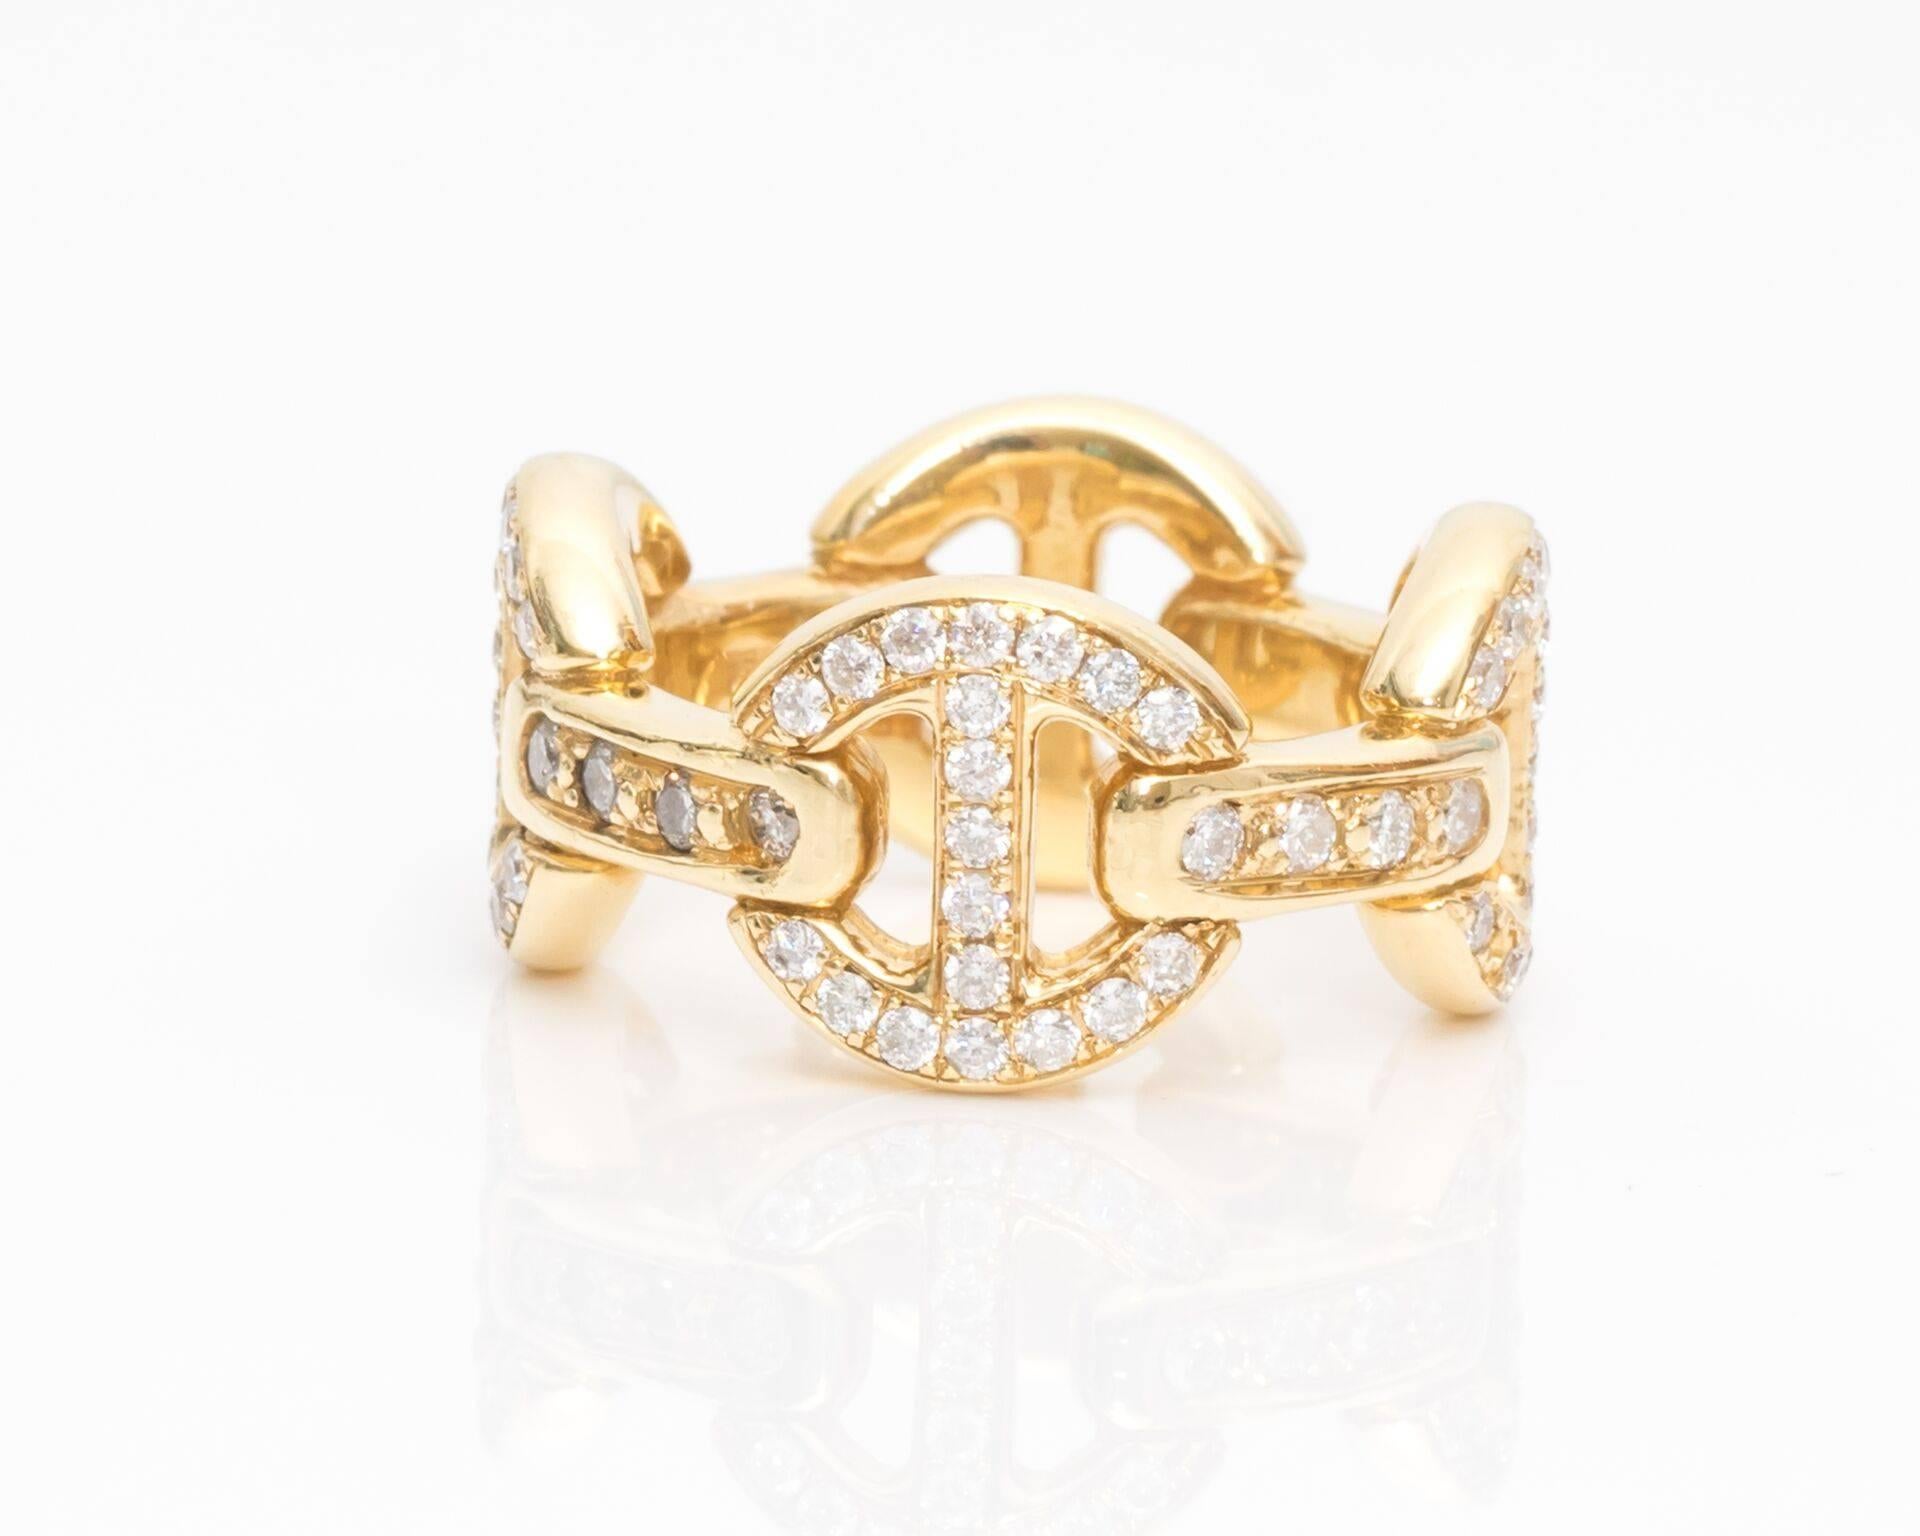 18 Karat Yellow Gold, 18.3 grams
Classic Tri-Link Band
Unisex
Embellished in Diamonds, 2.50 carats total weight 
G-H Color
VS2-SI2 Clarity 

Fits Ring Size 9, and cannot be resized. 
